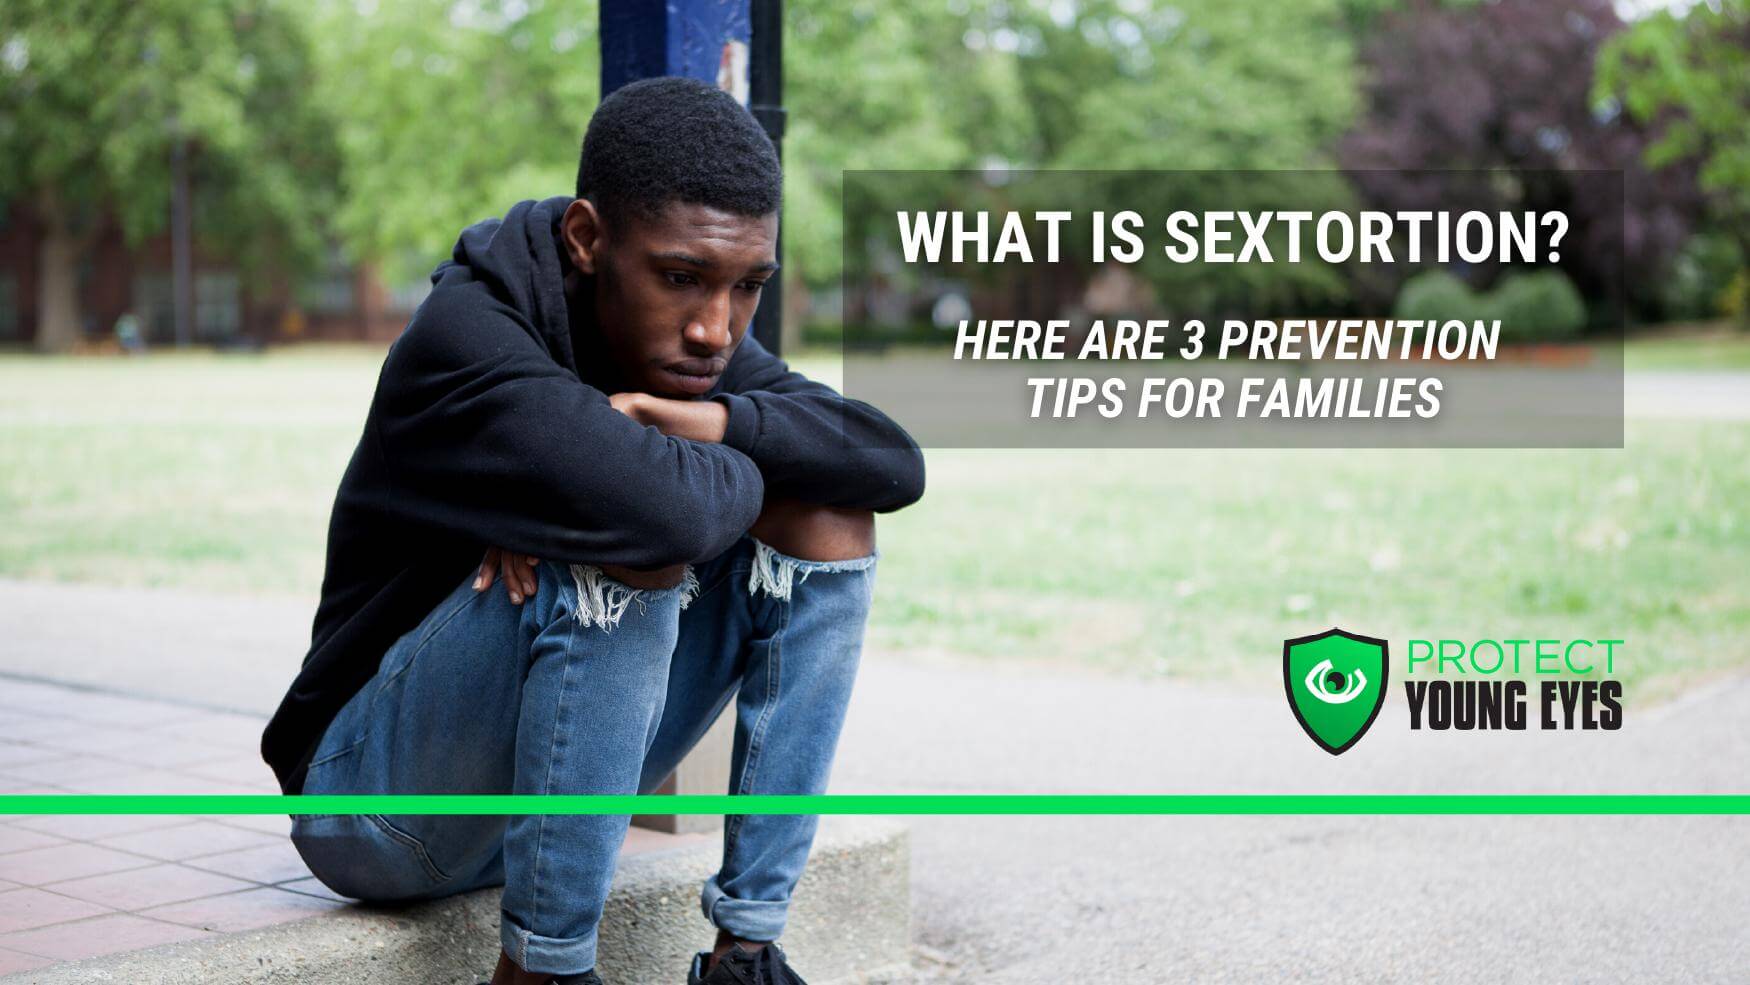 Www Telugu Sex Hd Com - What is Sextortion? 3 Prevention Tips for Families - Protect Young Eyes